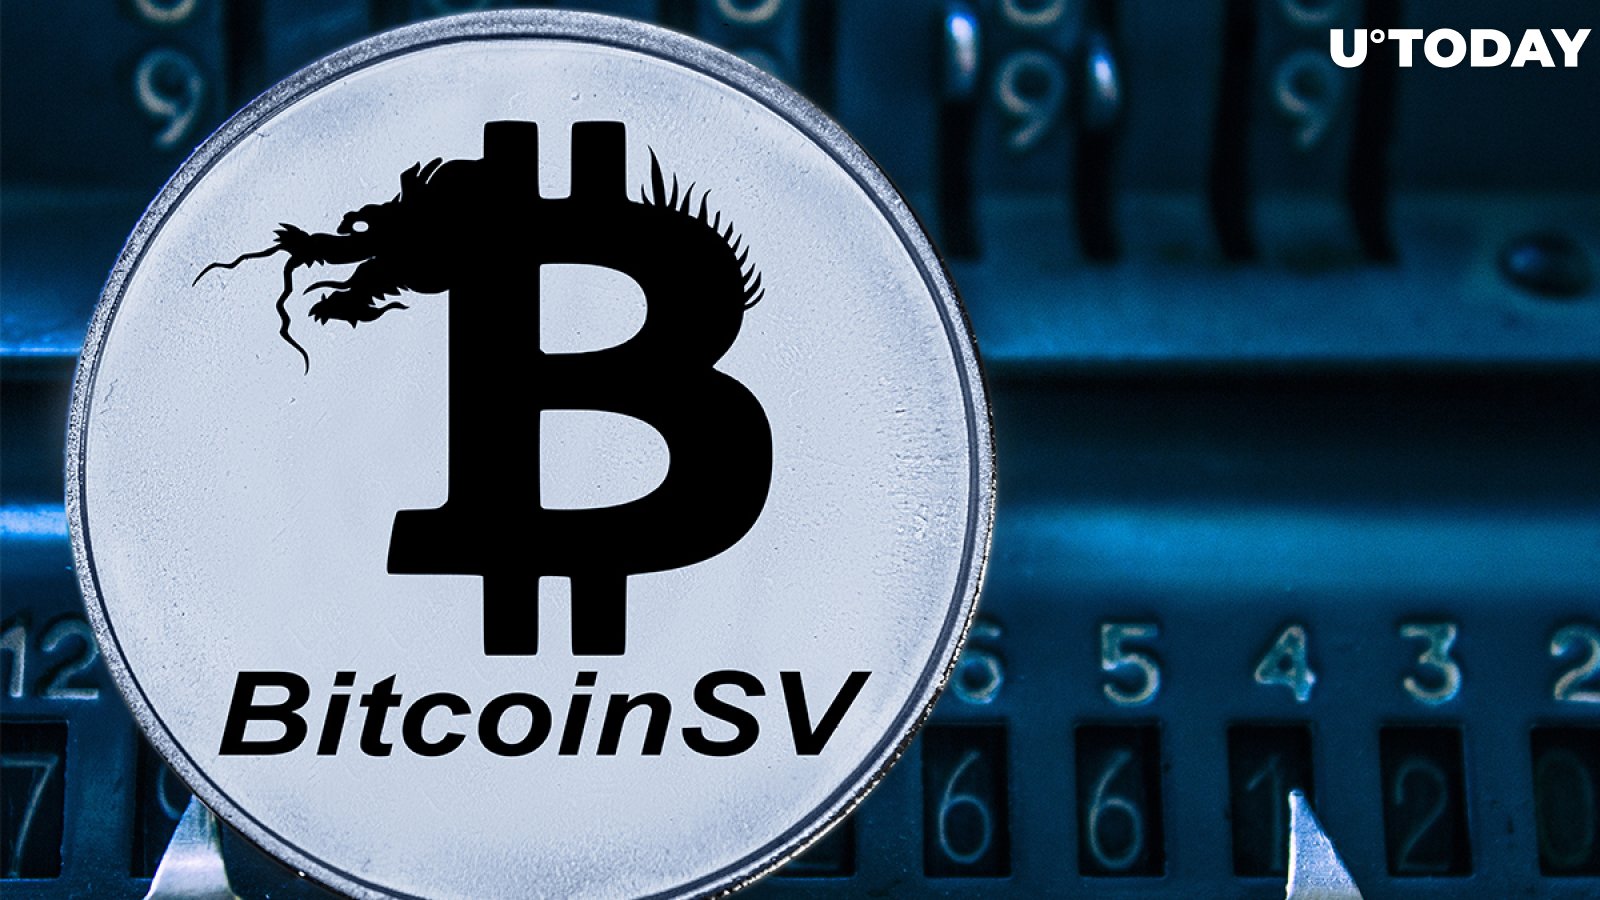 Bitcoin SV Price Skyrockets 90 Percent After Craig Wright Copyrights Bitcoin White Paper